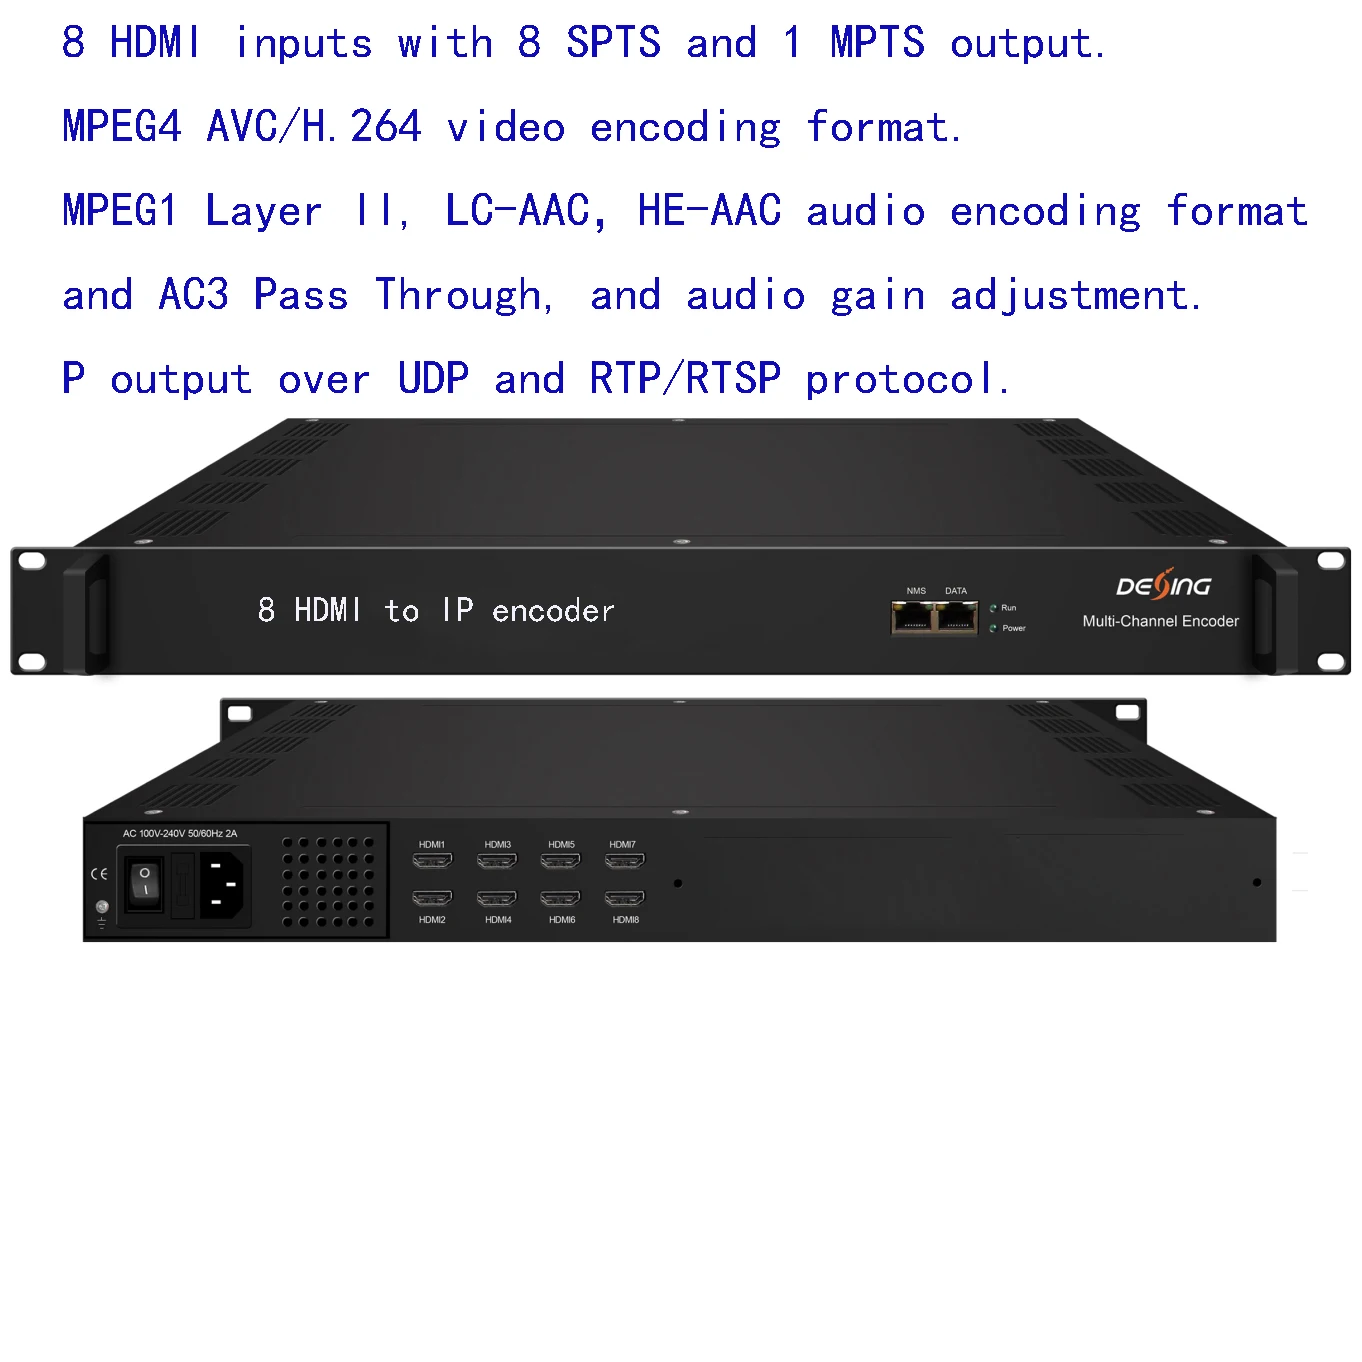 

NDS3228S Multi-channel Encoder, 8/16/24 HDMI to IP encoder, MPEG4 AVC/H.264 video encoding format